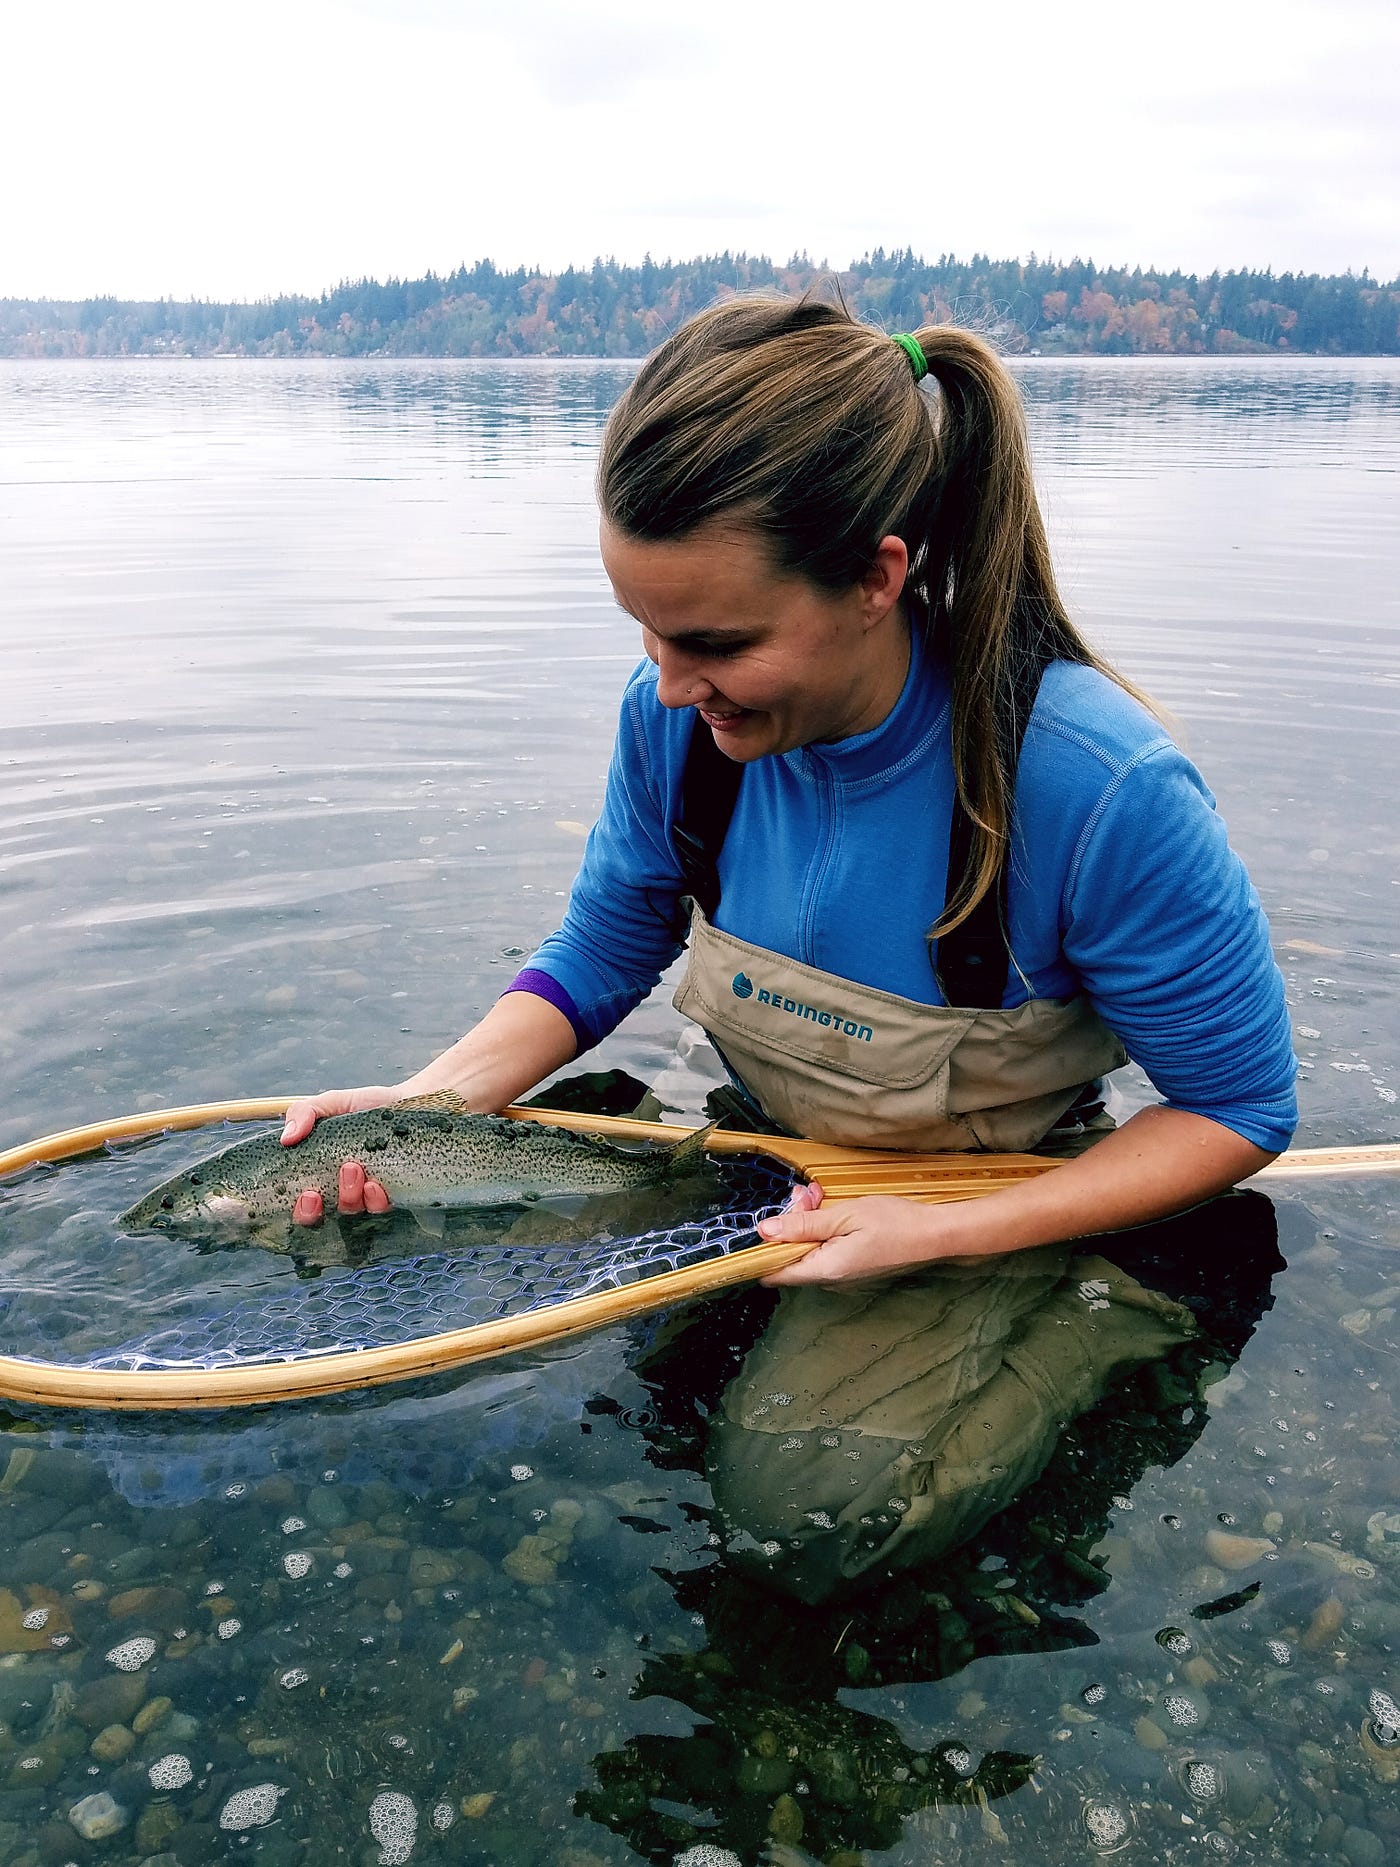 Ghost nets still fishing in the deep waters of Puget Sound